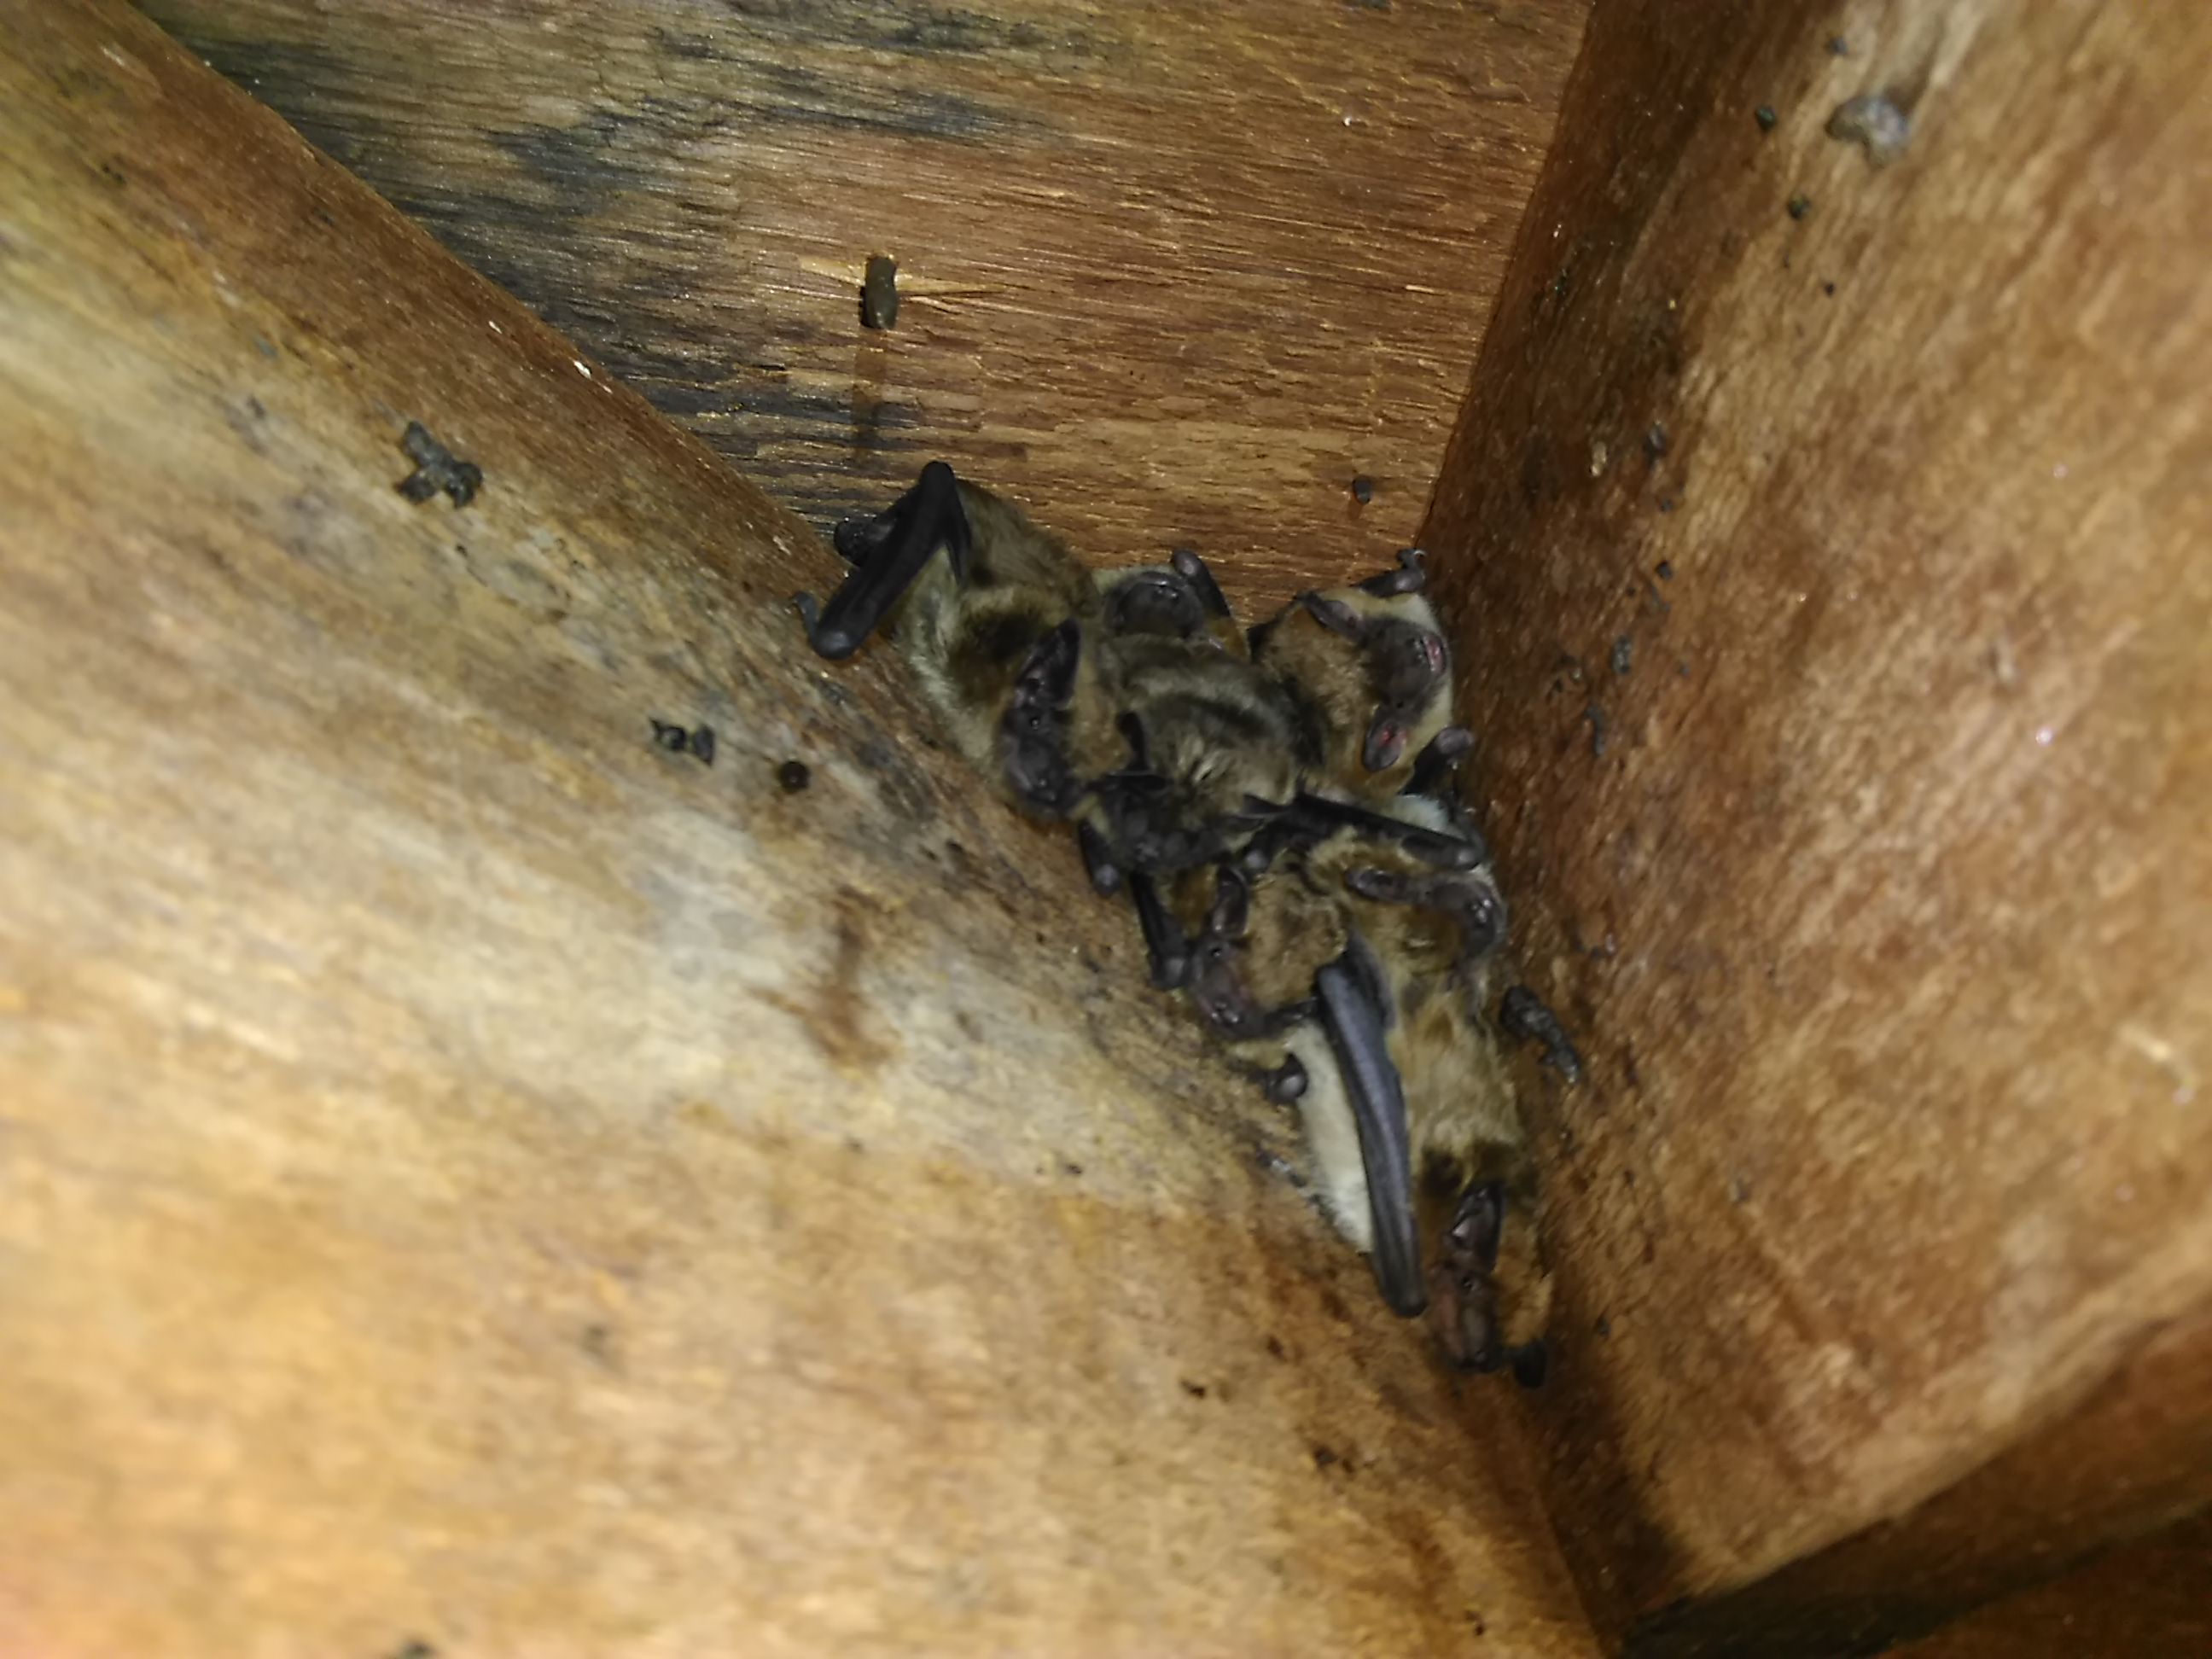 A colony of bats can go unnoticed inside attics for many years